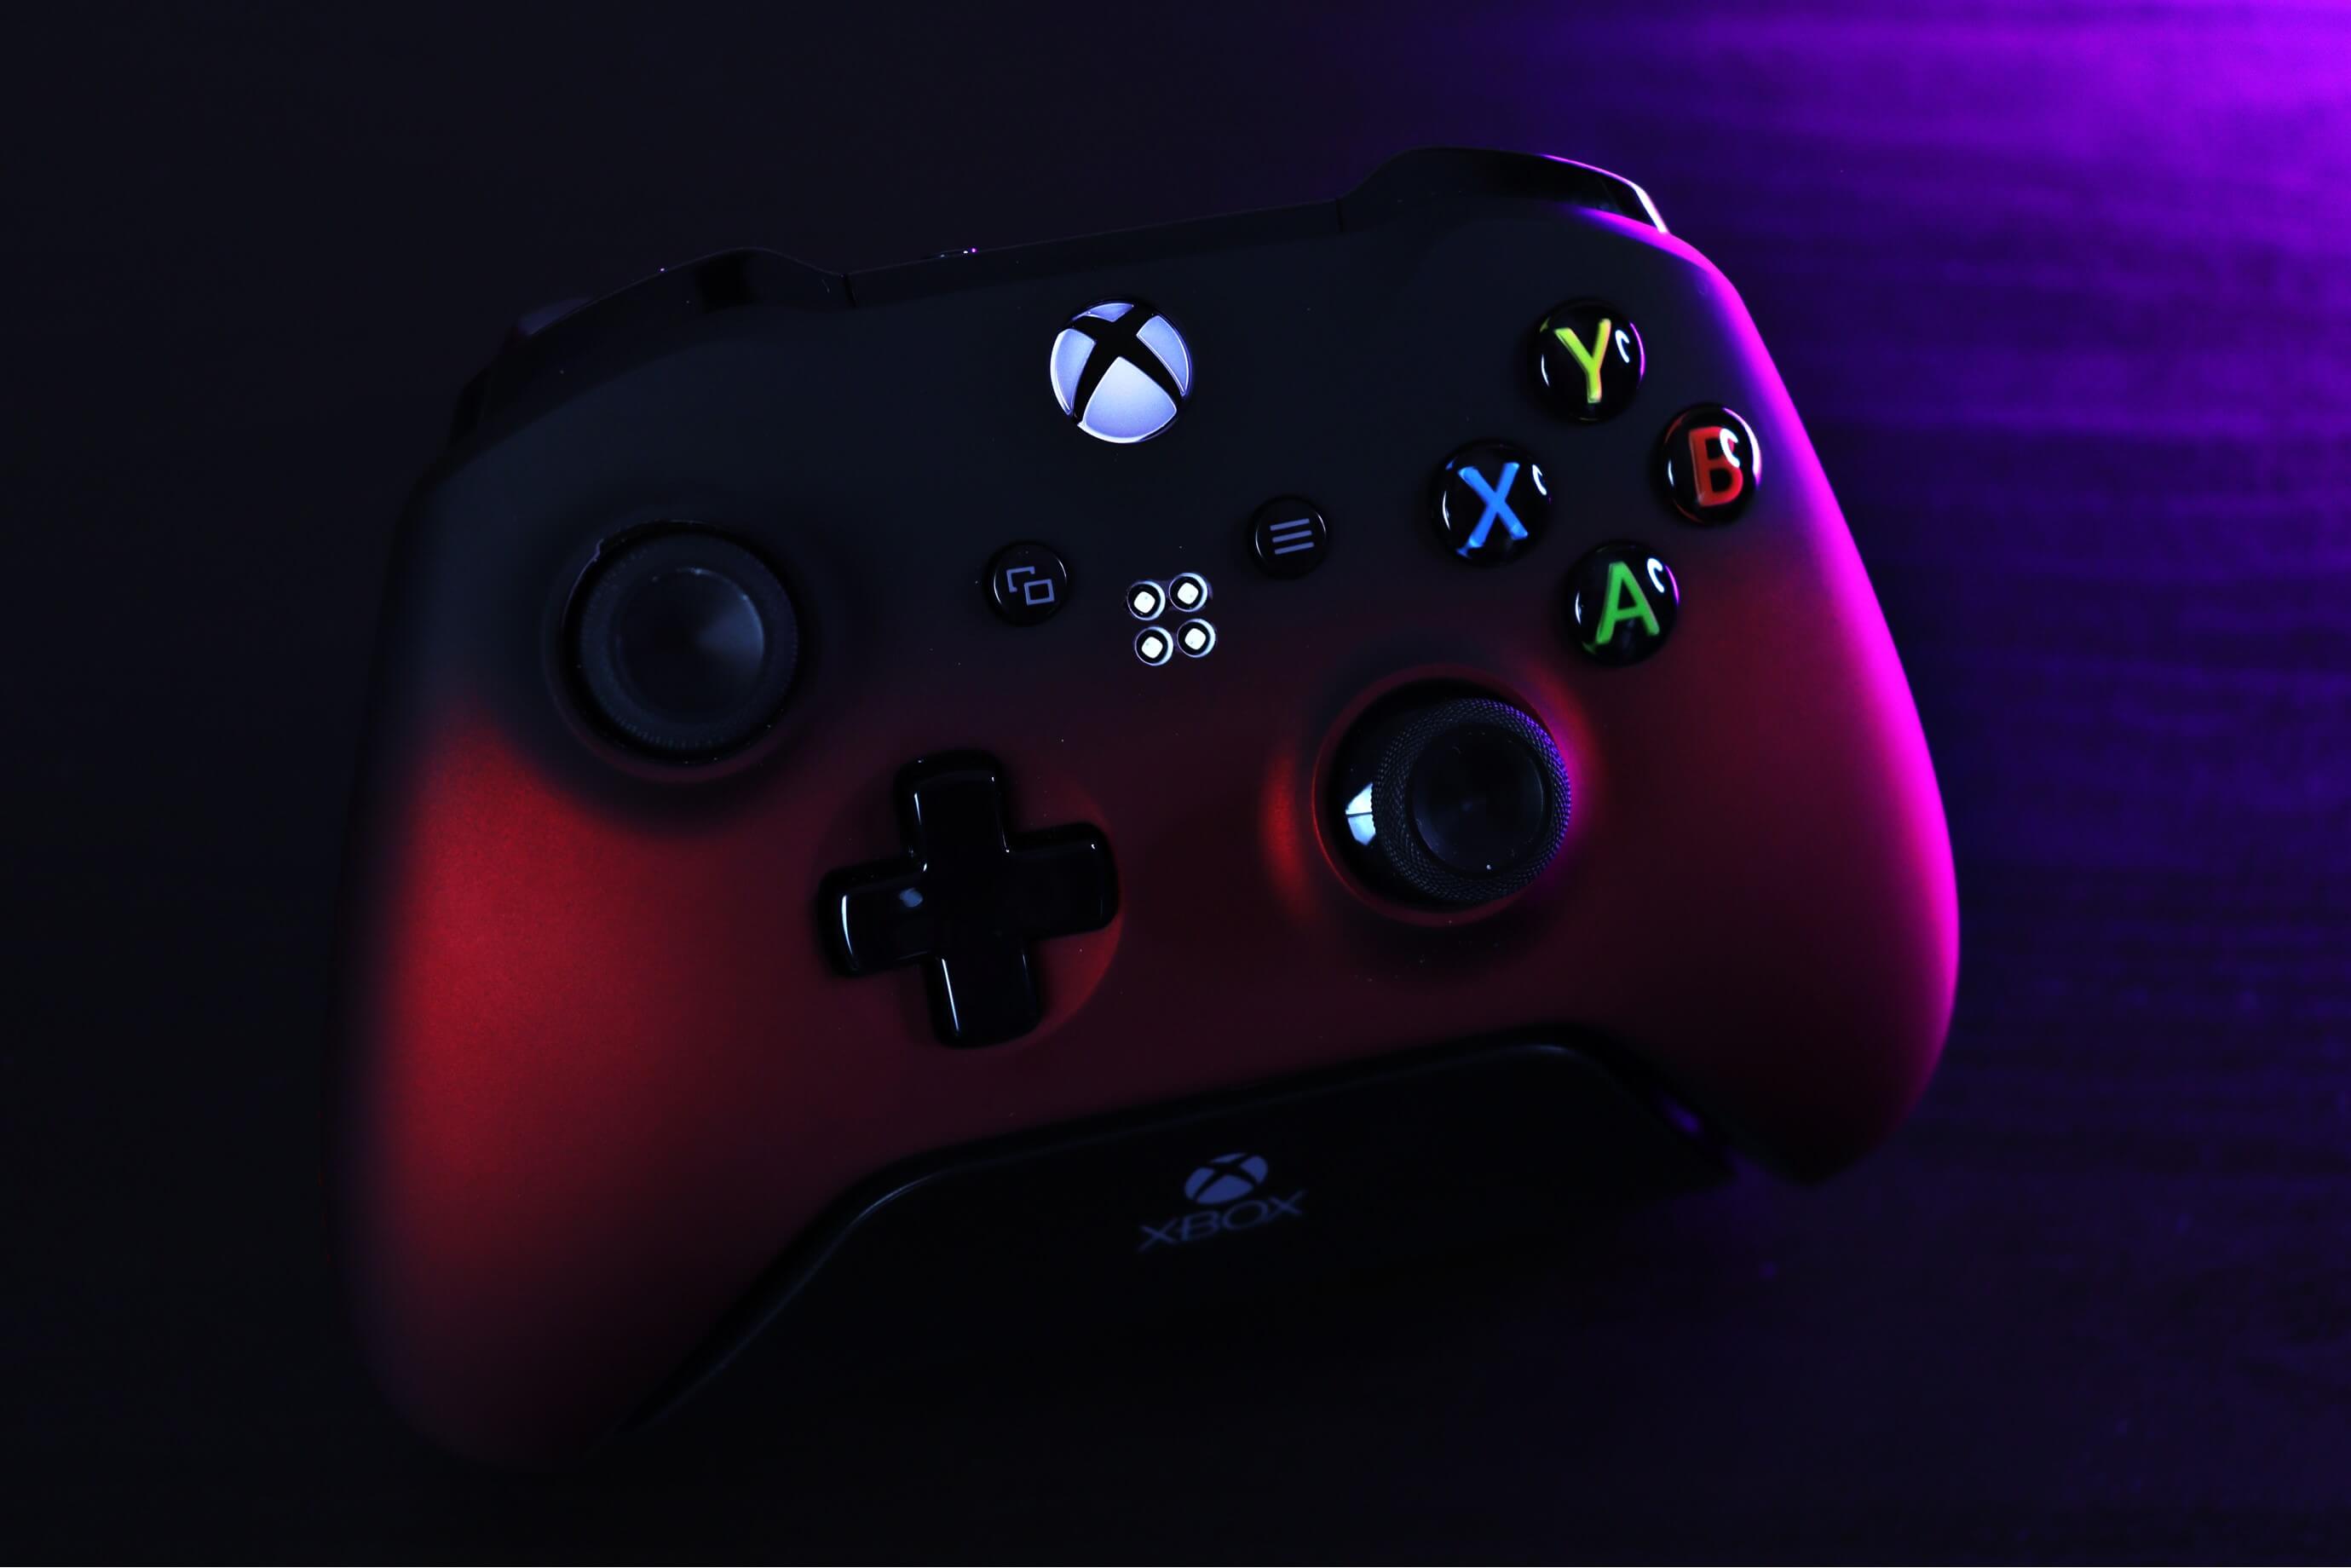 Best Xbox One Modded Controller - 2020 Guide